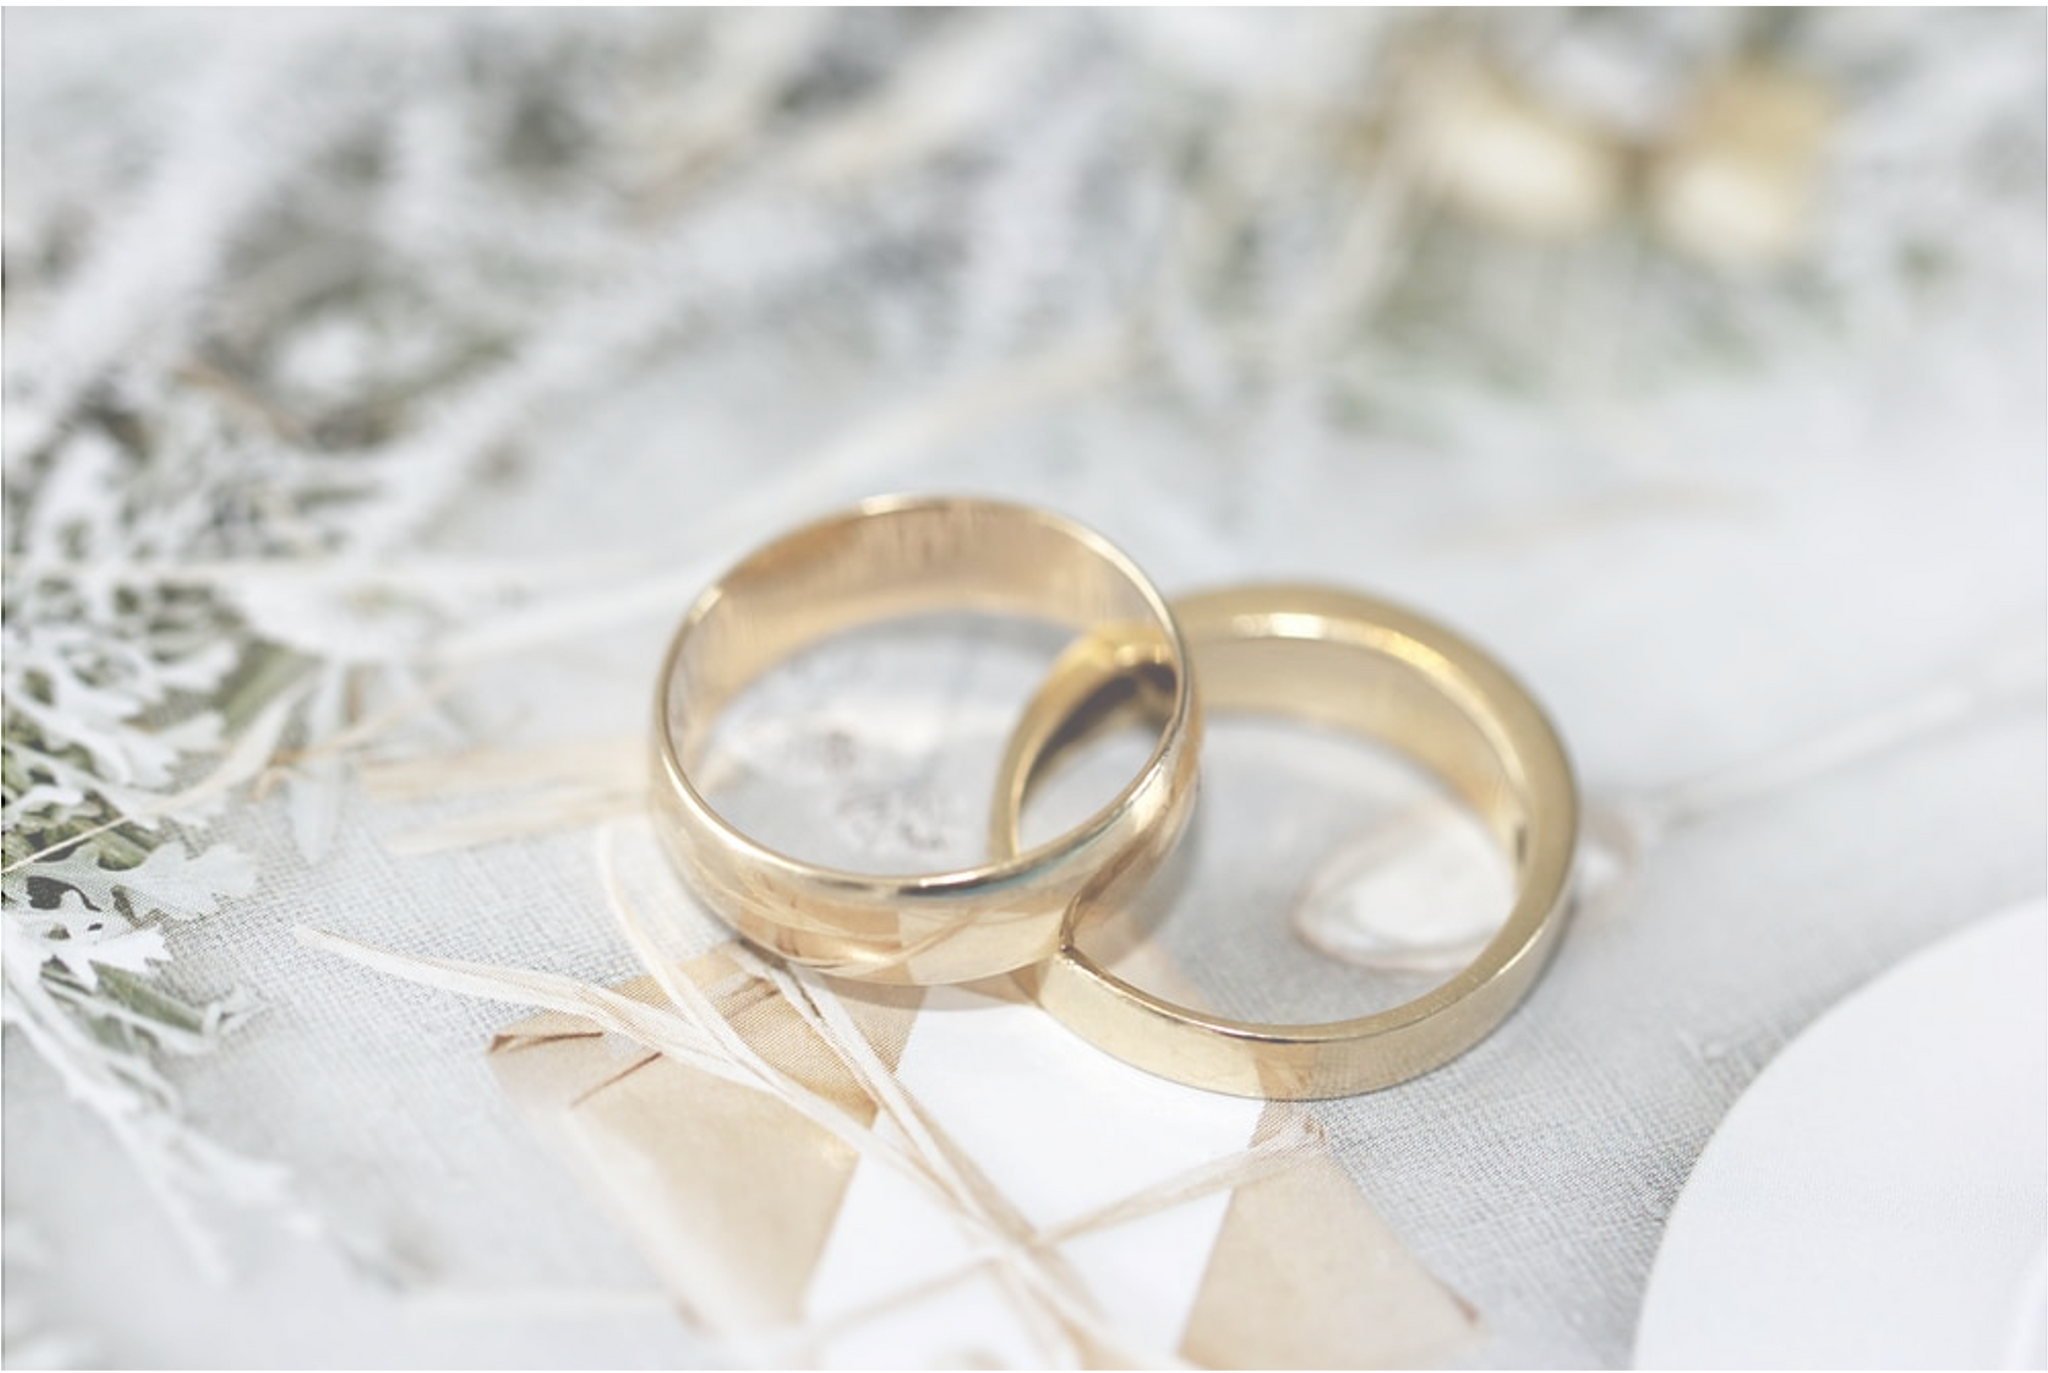 Jewellery Buying Guide: What’s The Best Metal For Wedding & Engagement Rings?